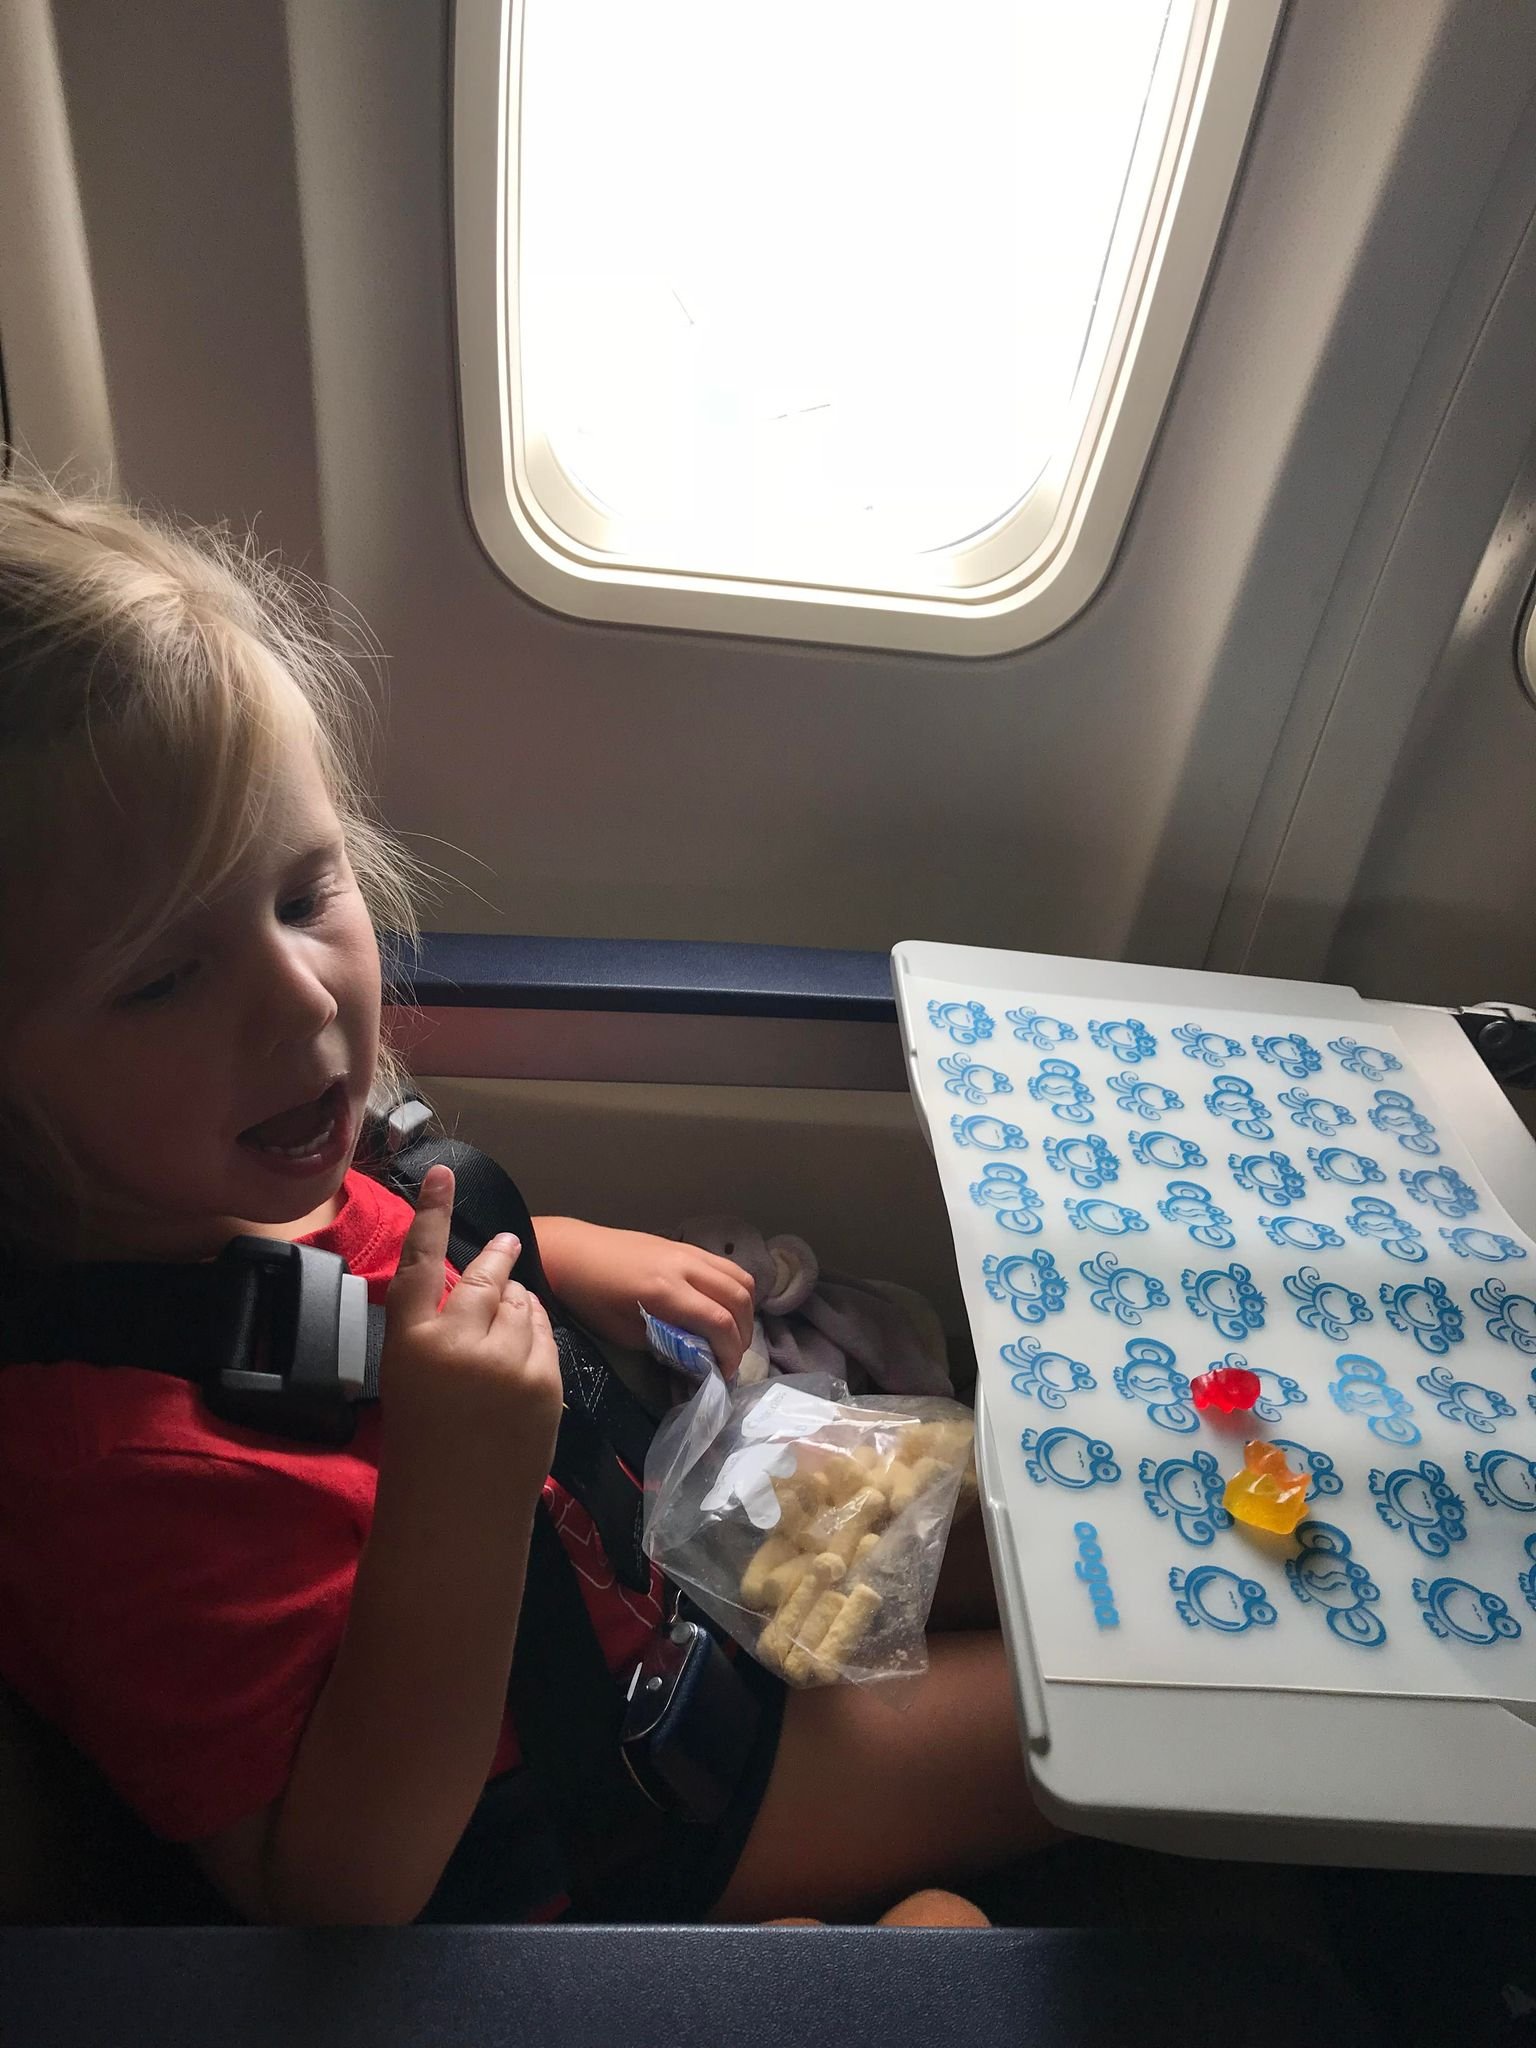 Top 13 Tips for Traveling with Toddlers on a Plane - My Cancer Chic